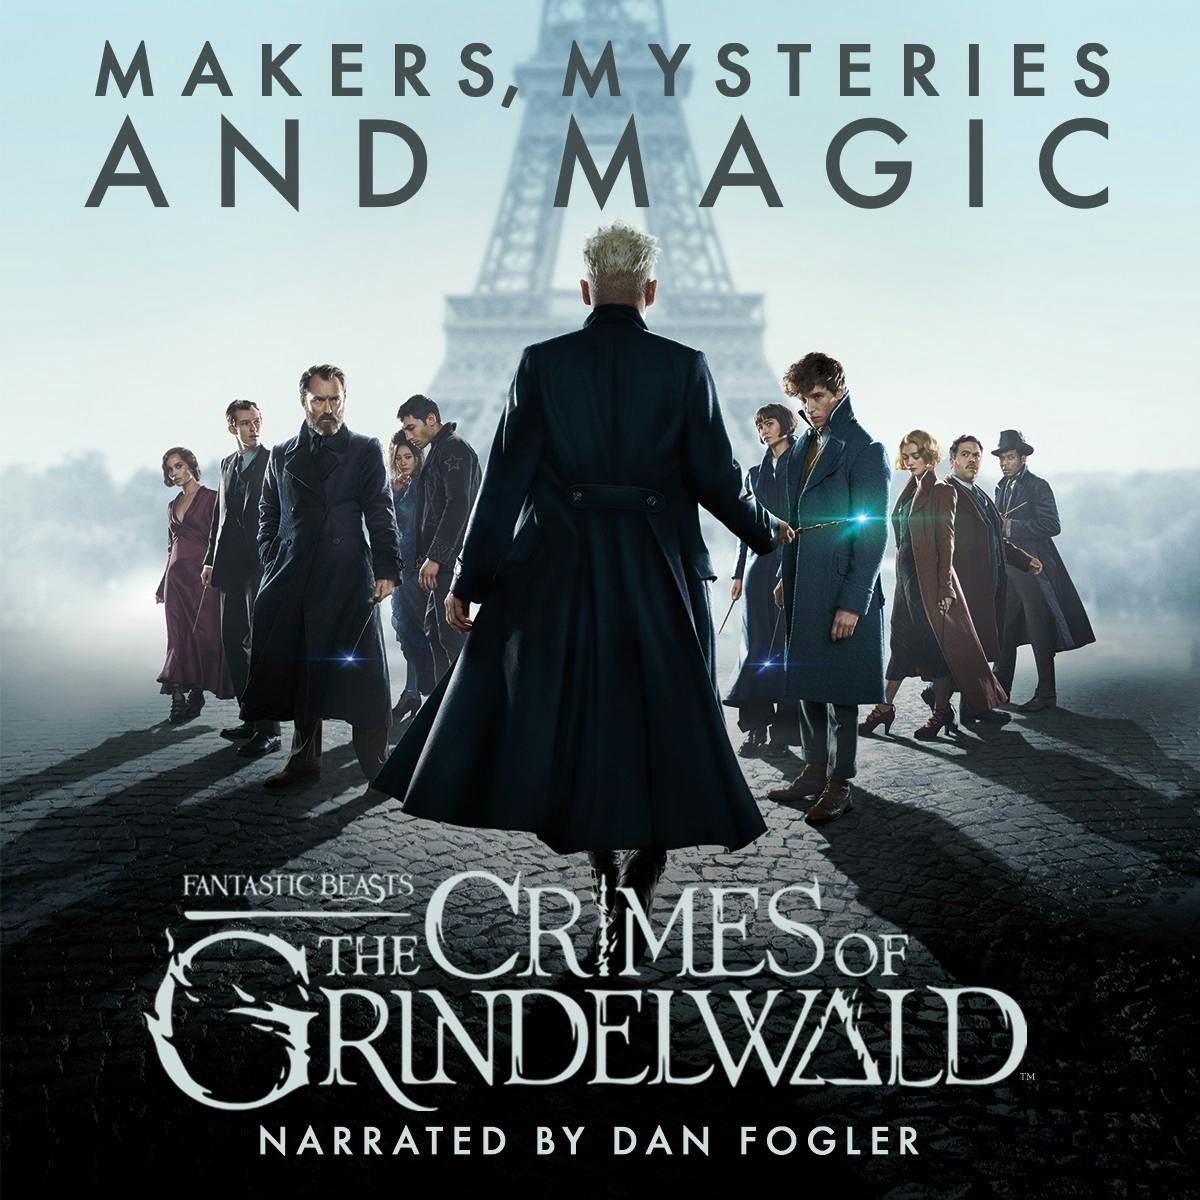 Fantastic Beasts: The Crimes of Grindelwald – Makers, Mysteries and Magic: The Official Audio Documentary - Mark Salisbury, Hana Walker-Brown, Pottermore Publishing